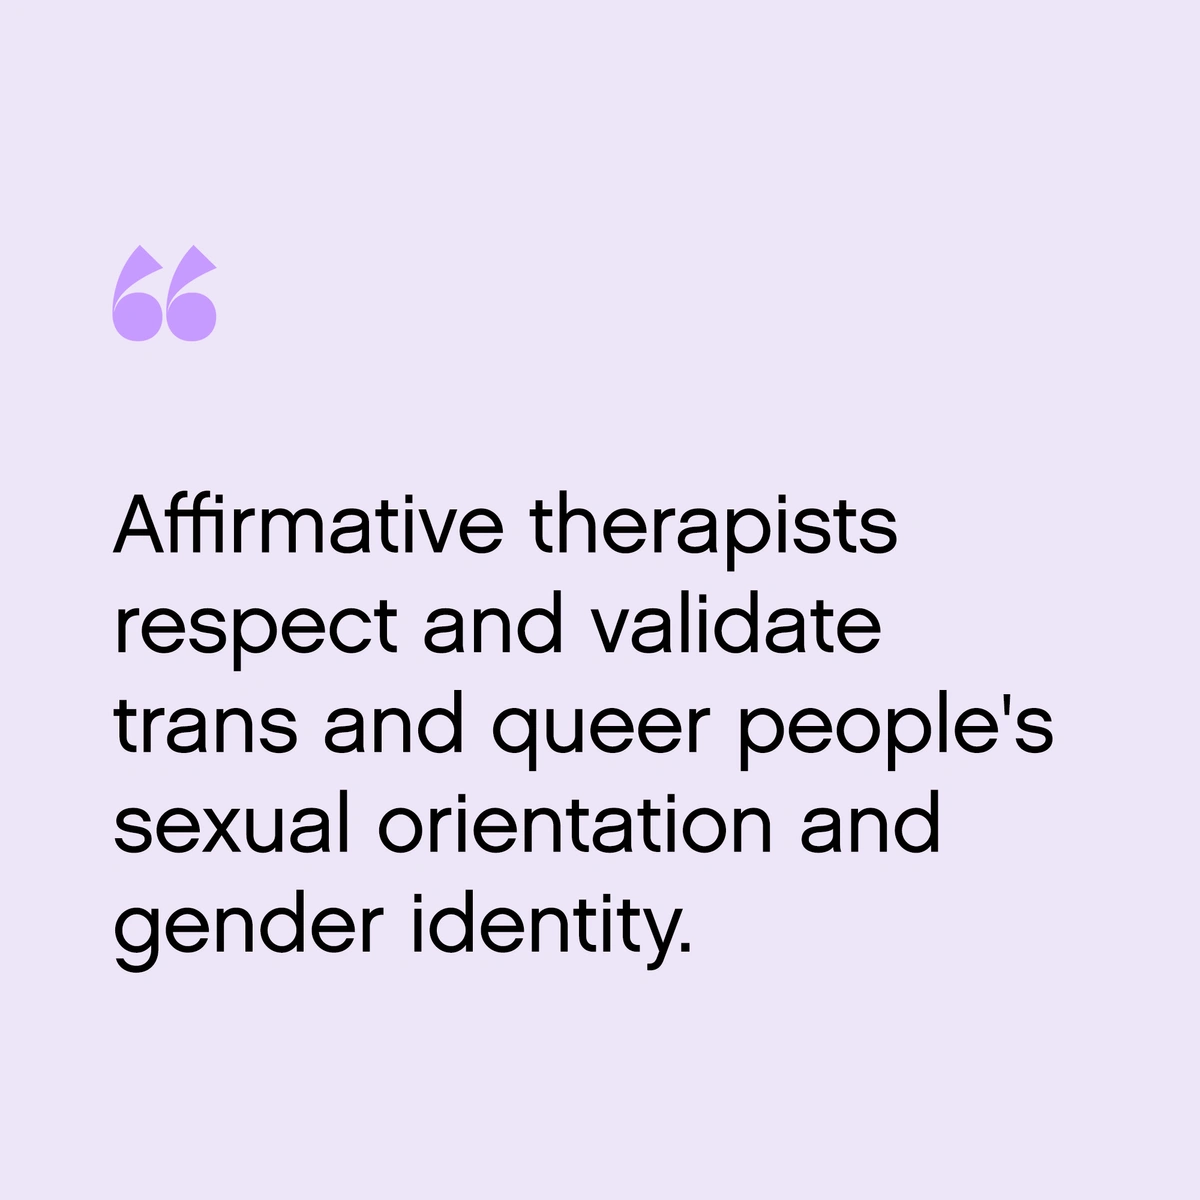 FOLX quote: "Affirmative therapists respect and validate trans and queer people's sexual orientation and gender identity."